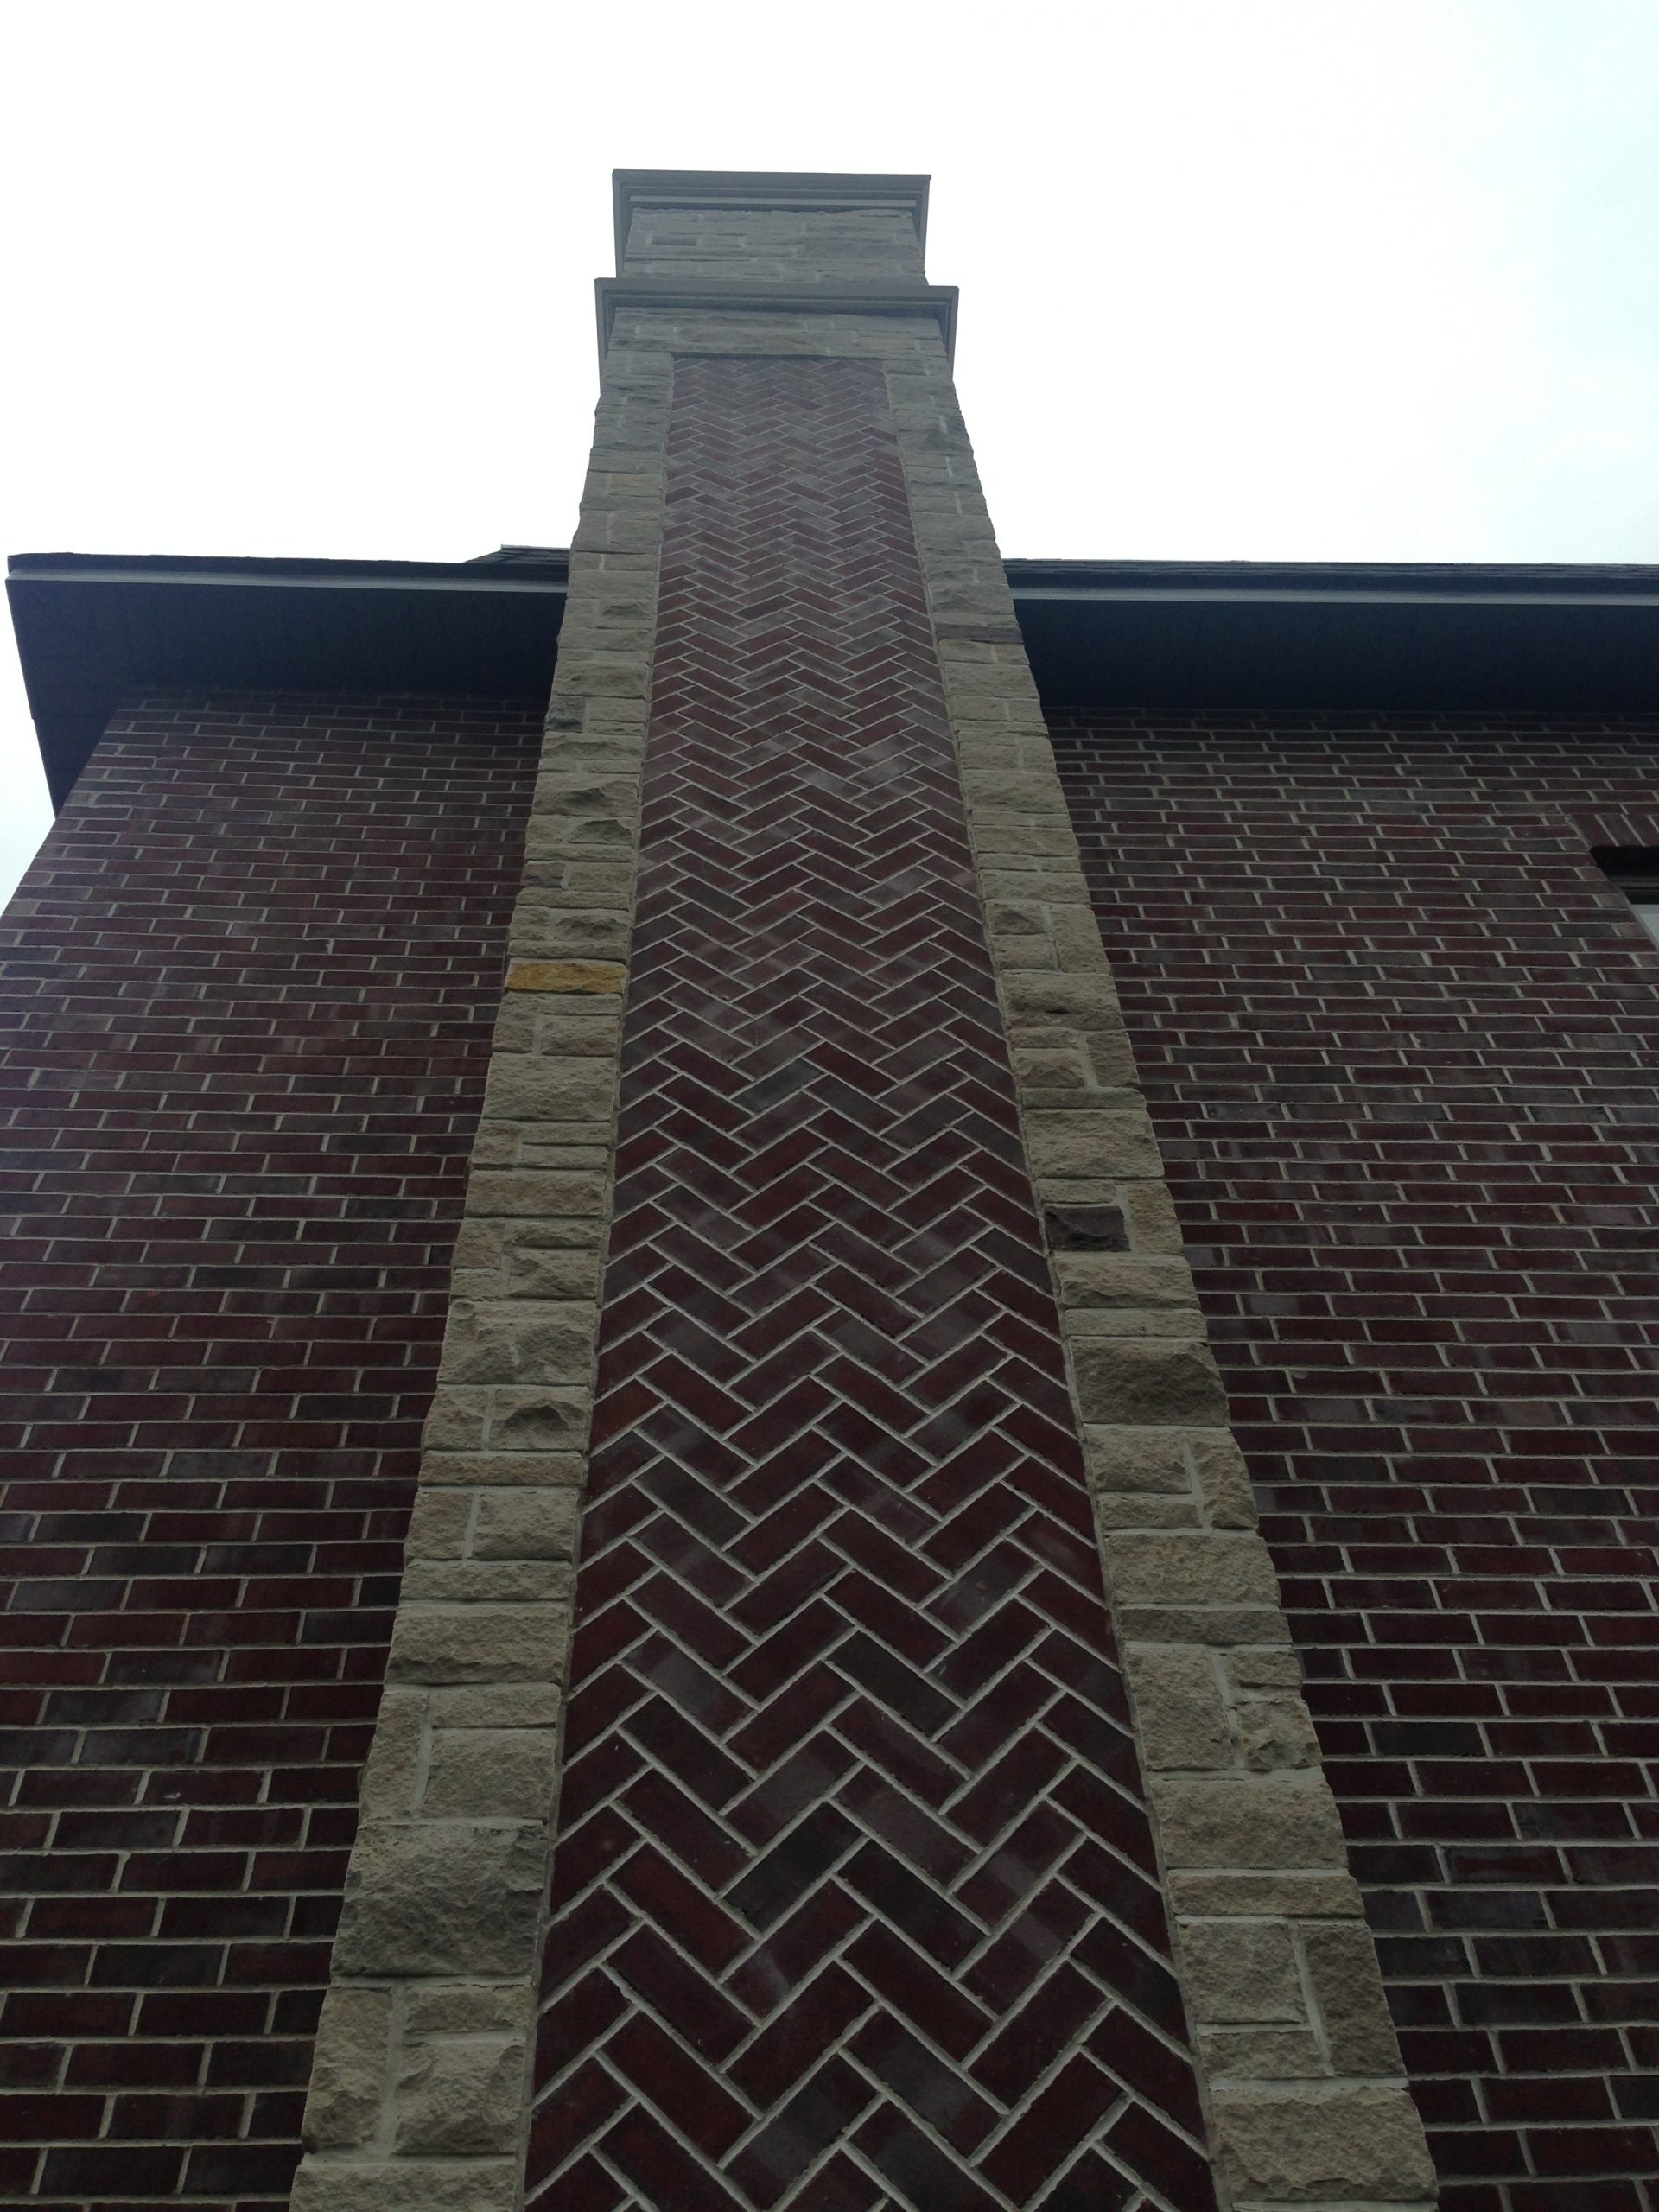 A chimney with natural stone outline and brick in a herringbone patern